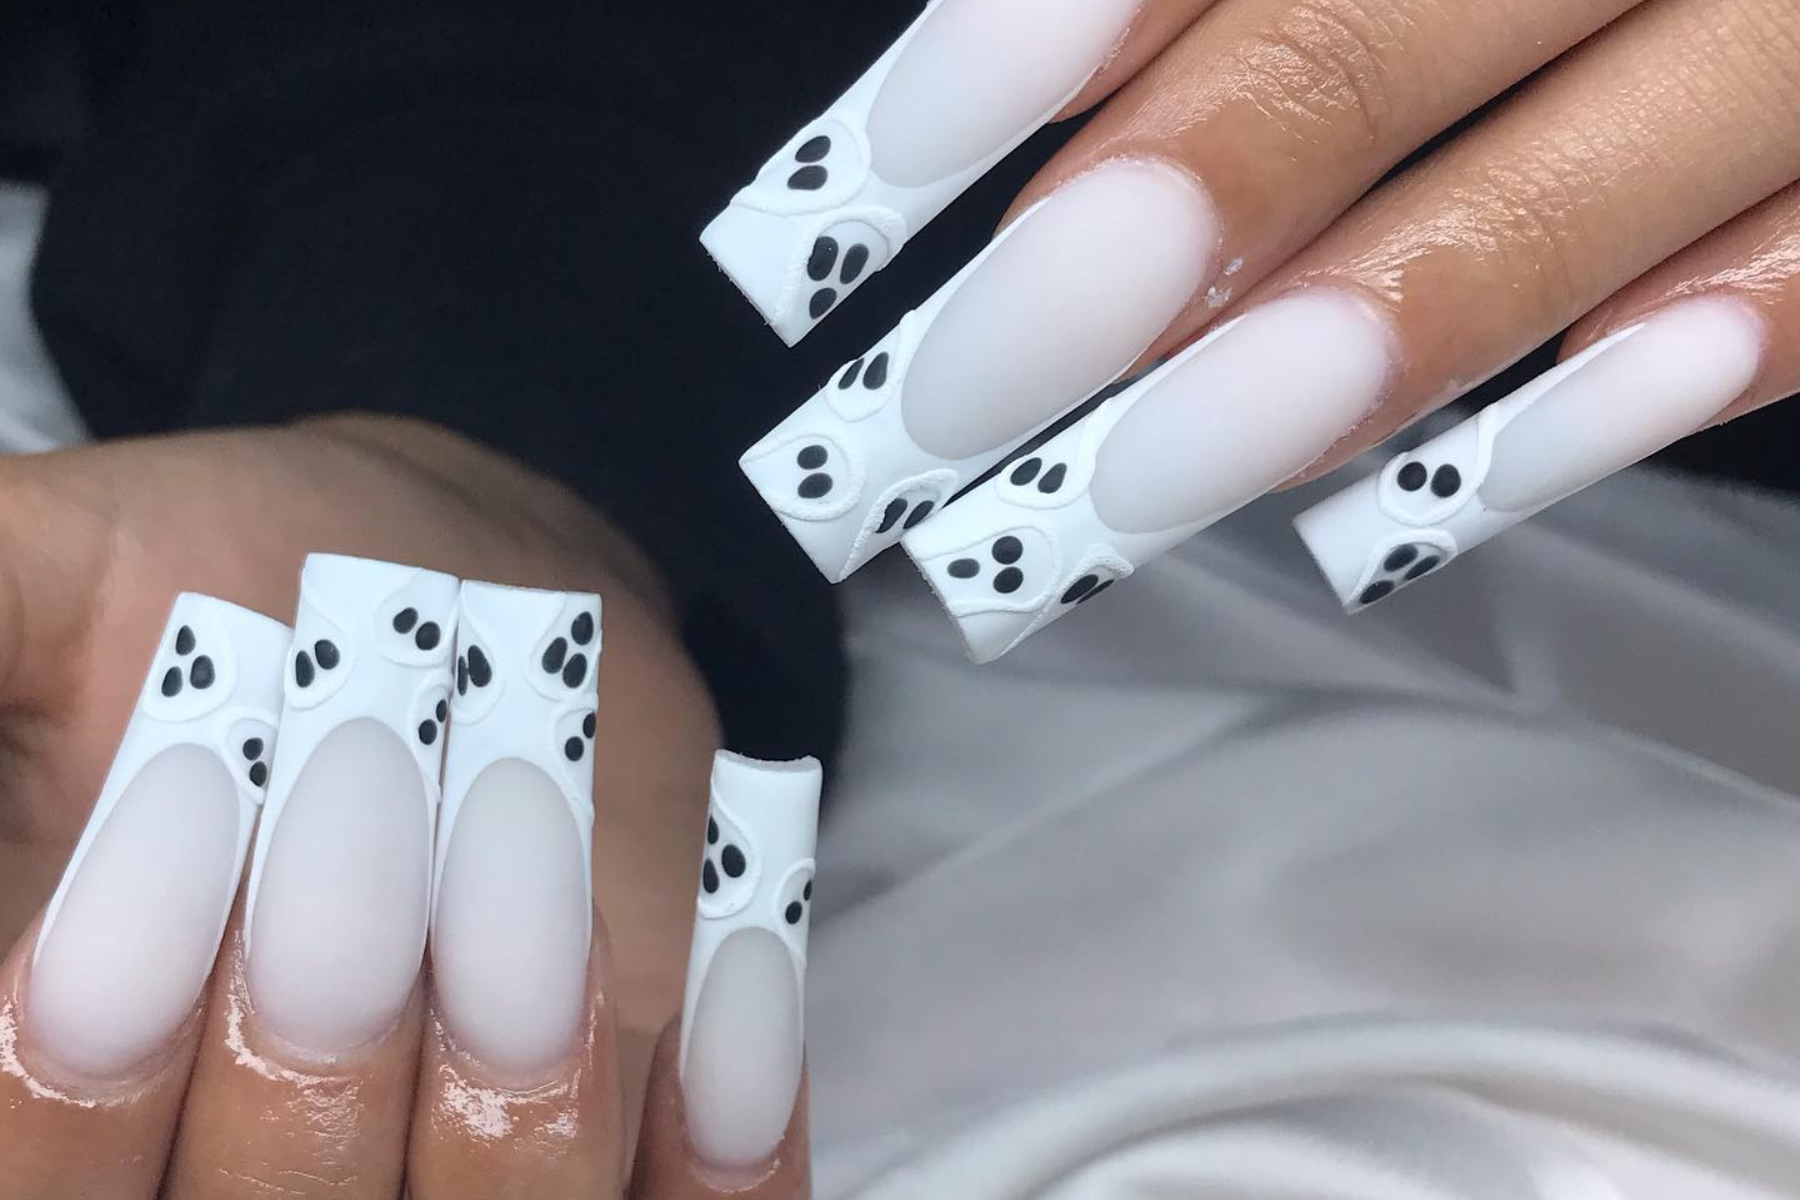 23 Best Black and White Nail Ideas and Designs to Copy in 2022